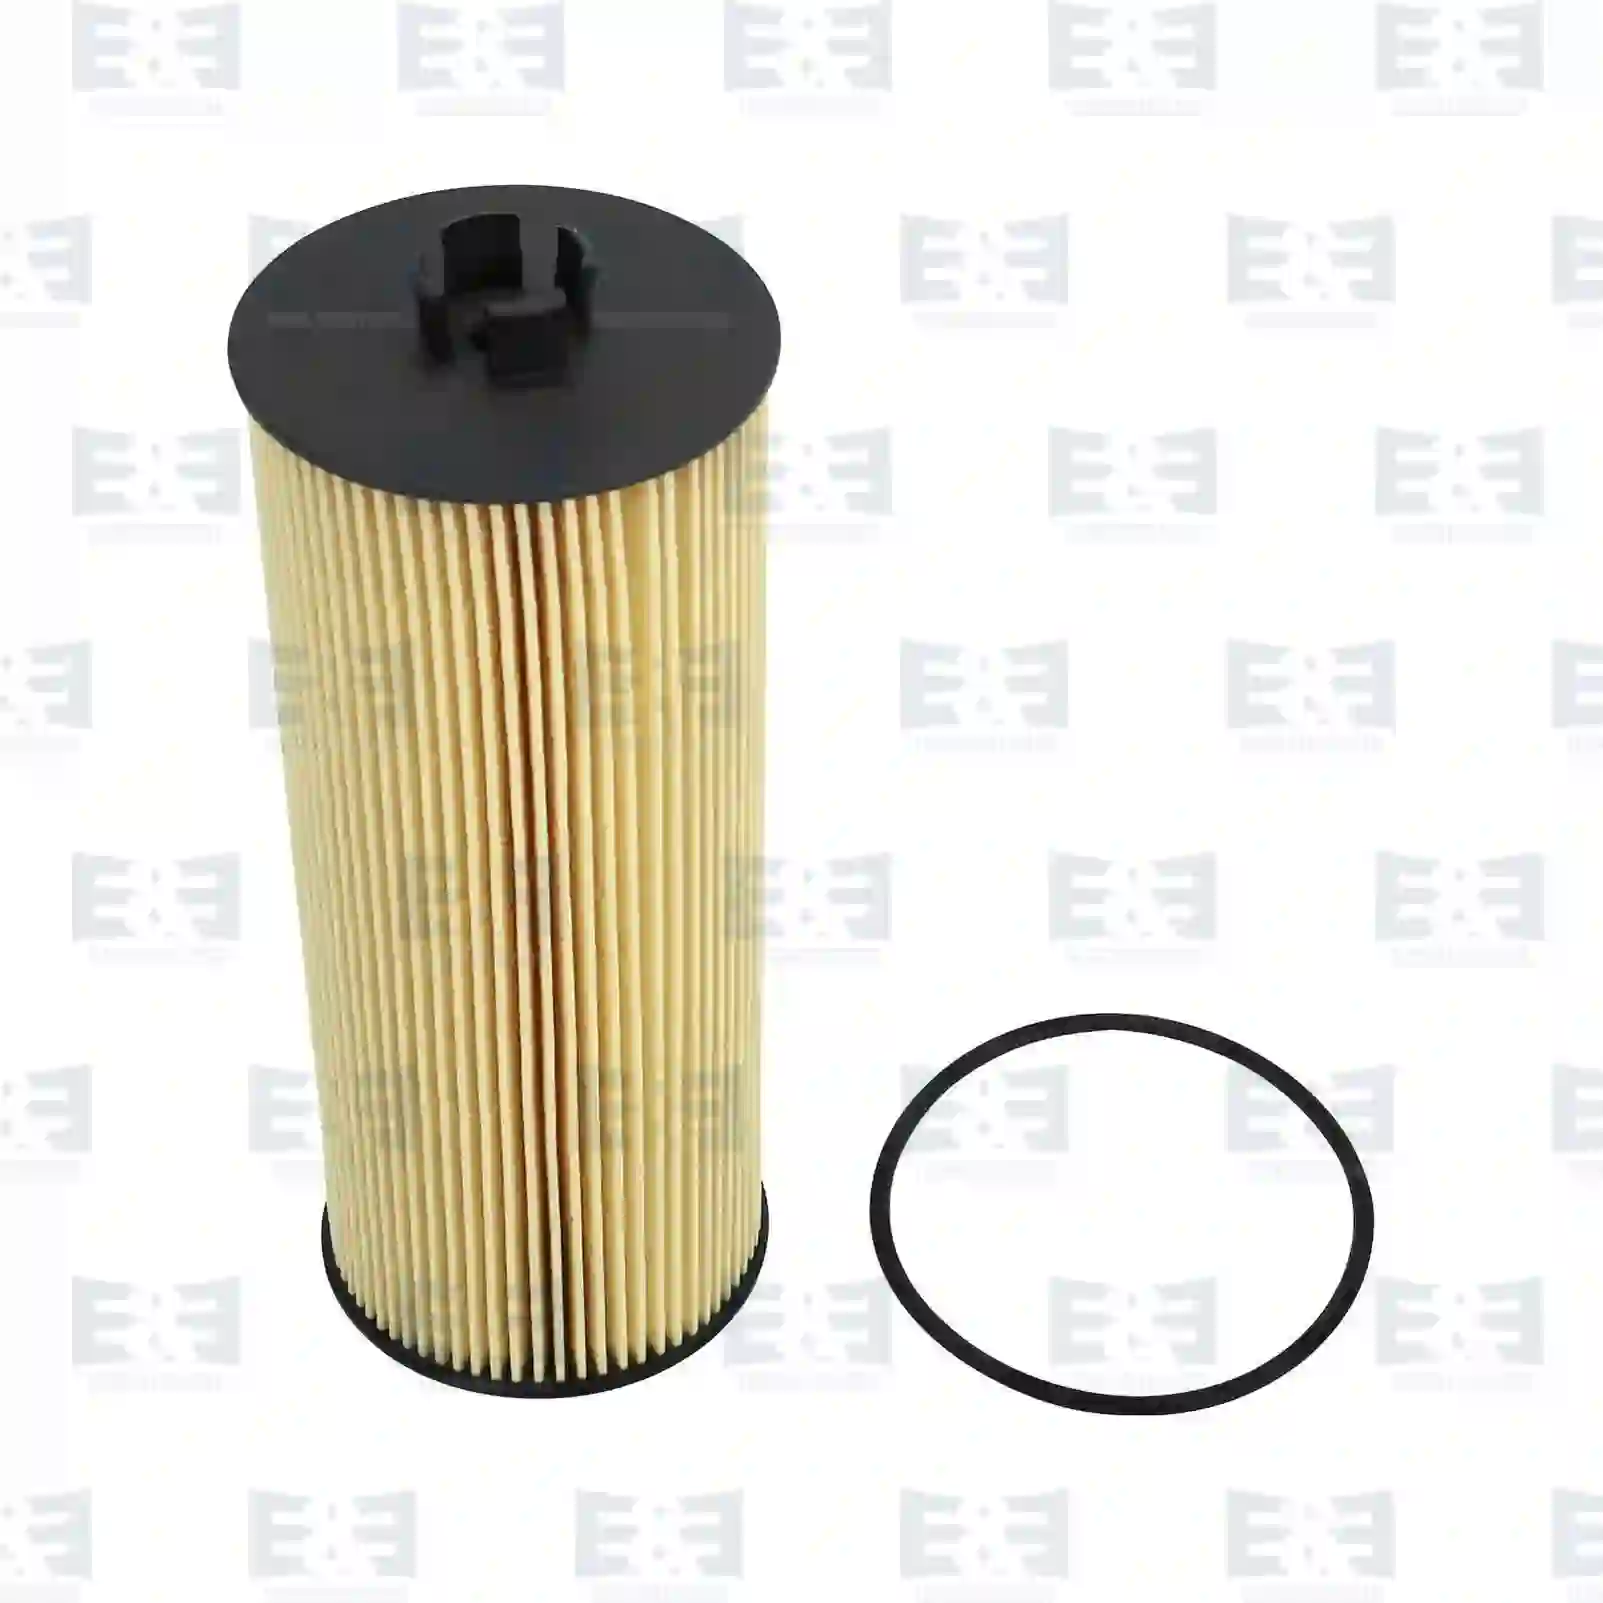 Oil Filter Oil filter insert, EE No 2E2209182 ,  oem no:0001801709, 0005459530, 44012512, 02931095, 04252248, F716200510020, 0001801709, ABPN10GLF3914, 02931095, 02931095, 04252248, 0001801709, 0001801709, 6861800109, 9061800009, 9061800209, 9061840325, 5021107448, 83120880070, 44012512, 11708551, ZG01738-0008 E&E Truck Spare Parts | Truck Spare Parts, Auotomotive Spare Parts